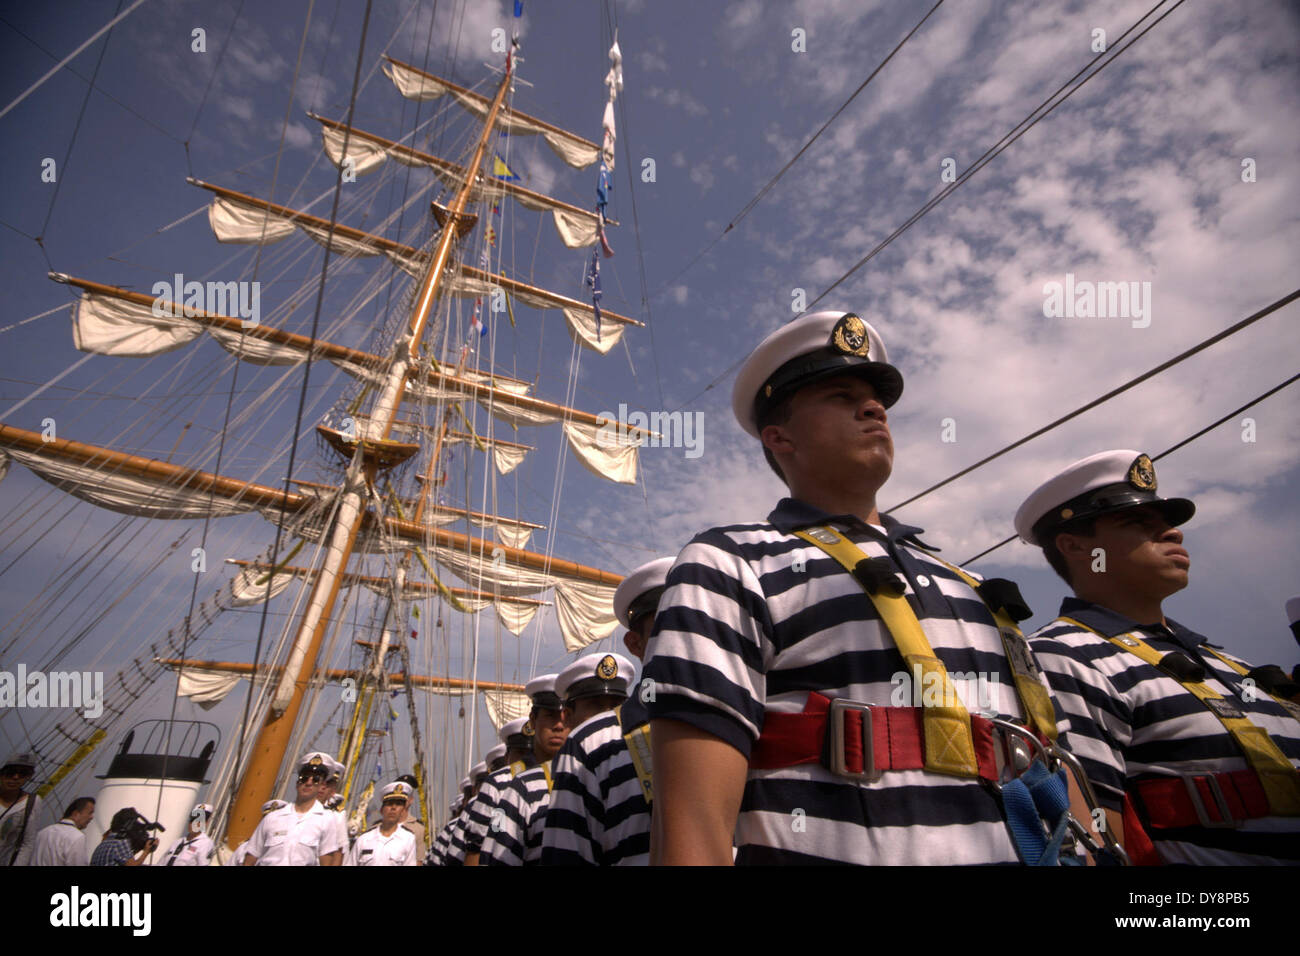 Acapulco, Mexico. 9th Apr, 2014. Crew members participate in a farewell ceremony for the Cuauhtemoc school ship of the Mexican Navy in the Acapulco port, Guerrero state, Mexico, April 9, 2014. The Cuauhtemoc school ship left the Acapulco port and started the project called 'Training Cruise America 2014' as part of the training of young marines. In this 228-day long project, the ship will visit 22 ports in 12 countries. © Abdel Meza/Xinhua/Alamy Live News Stock Photo